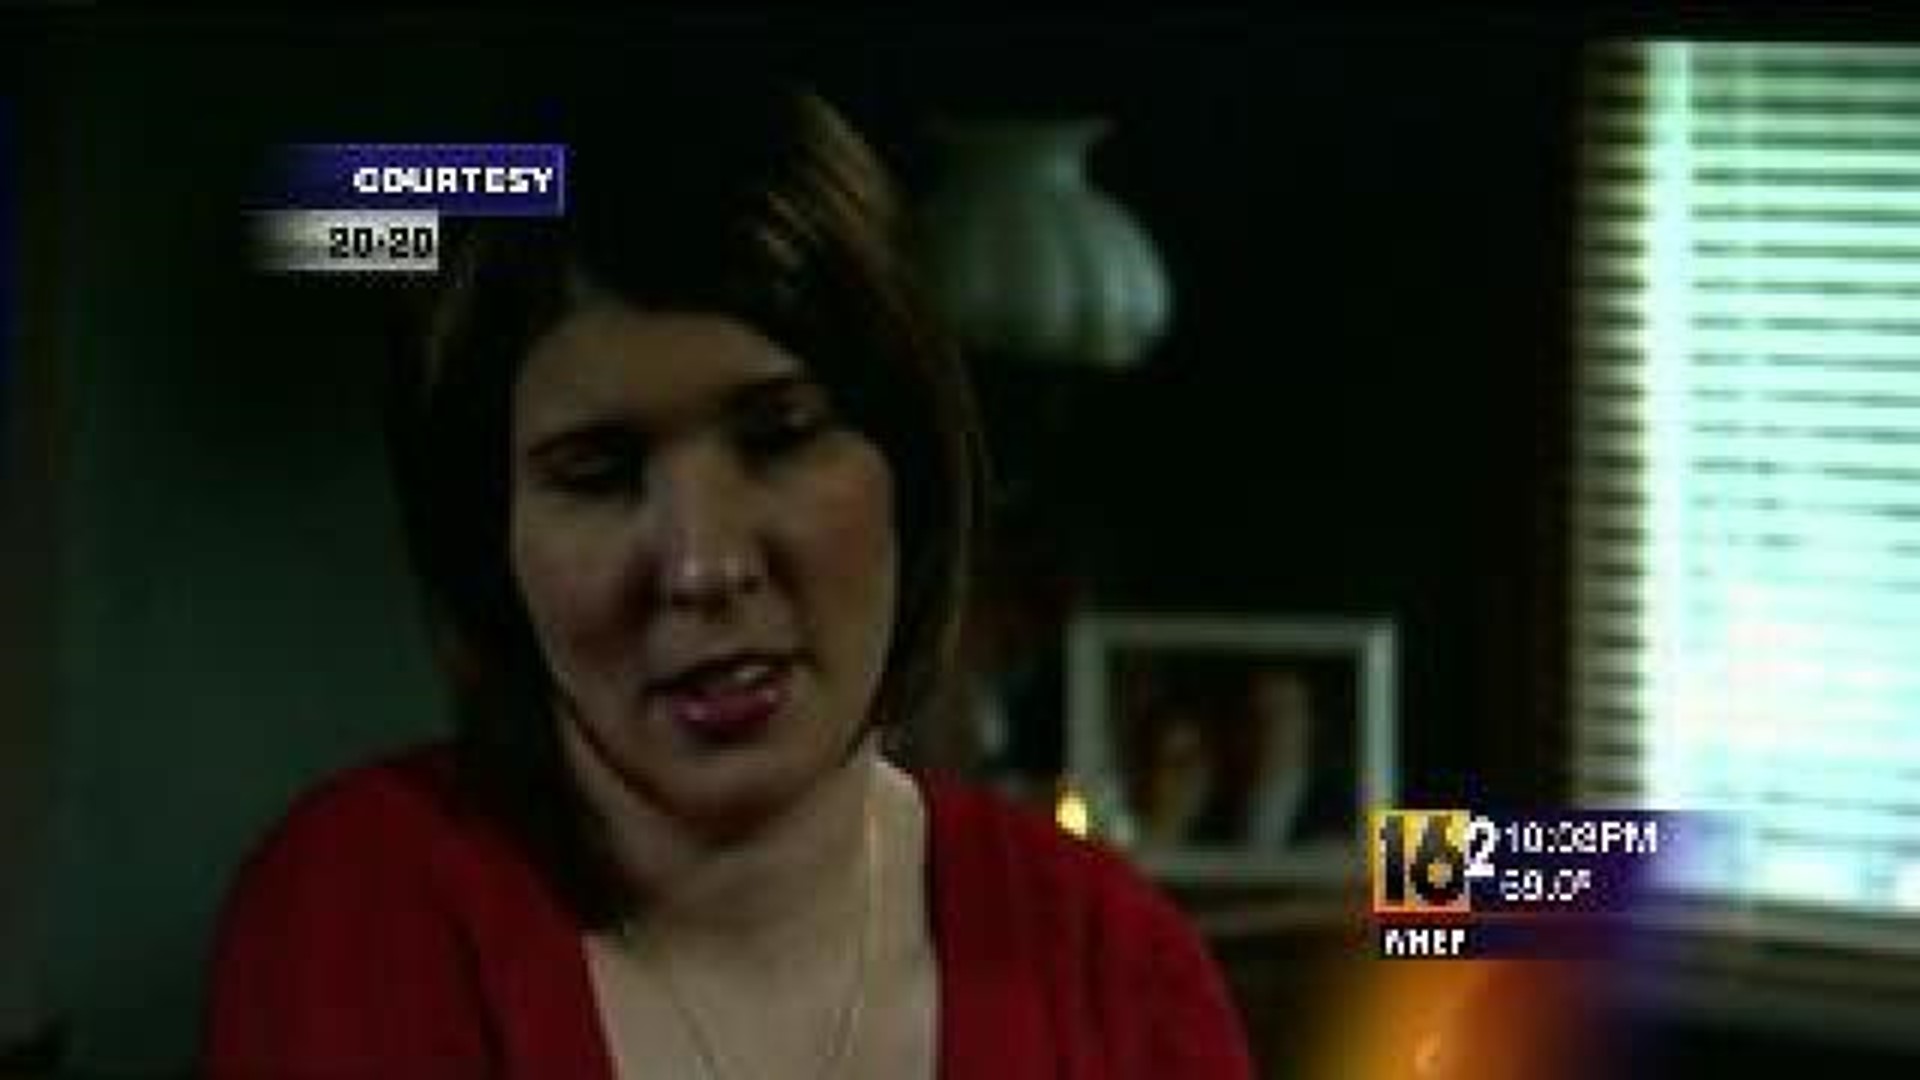 In Captivity: Victim Speaks Out